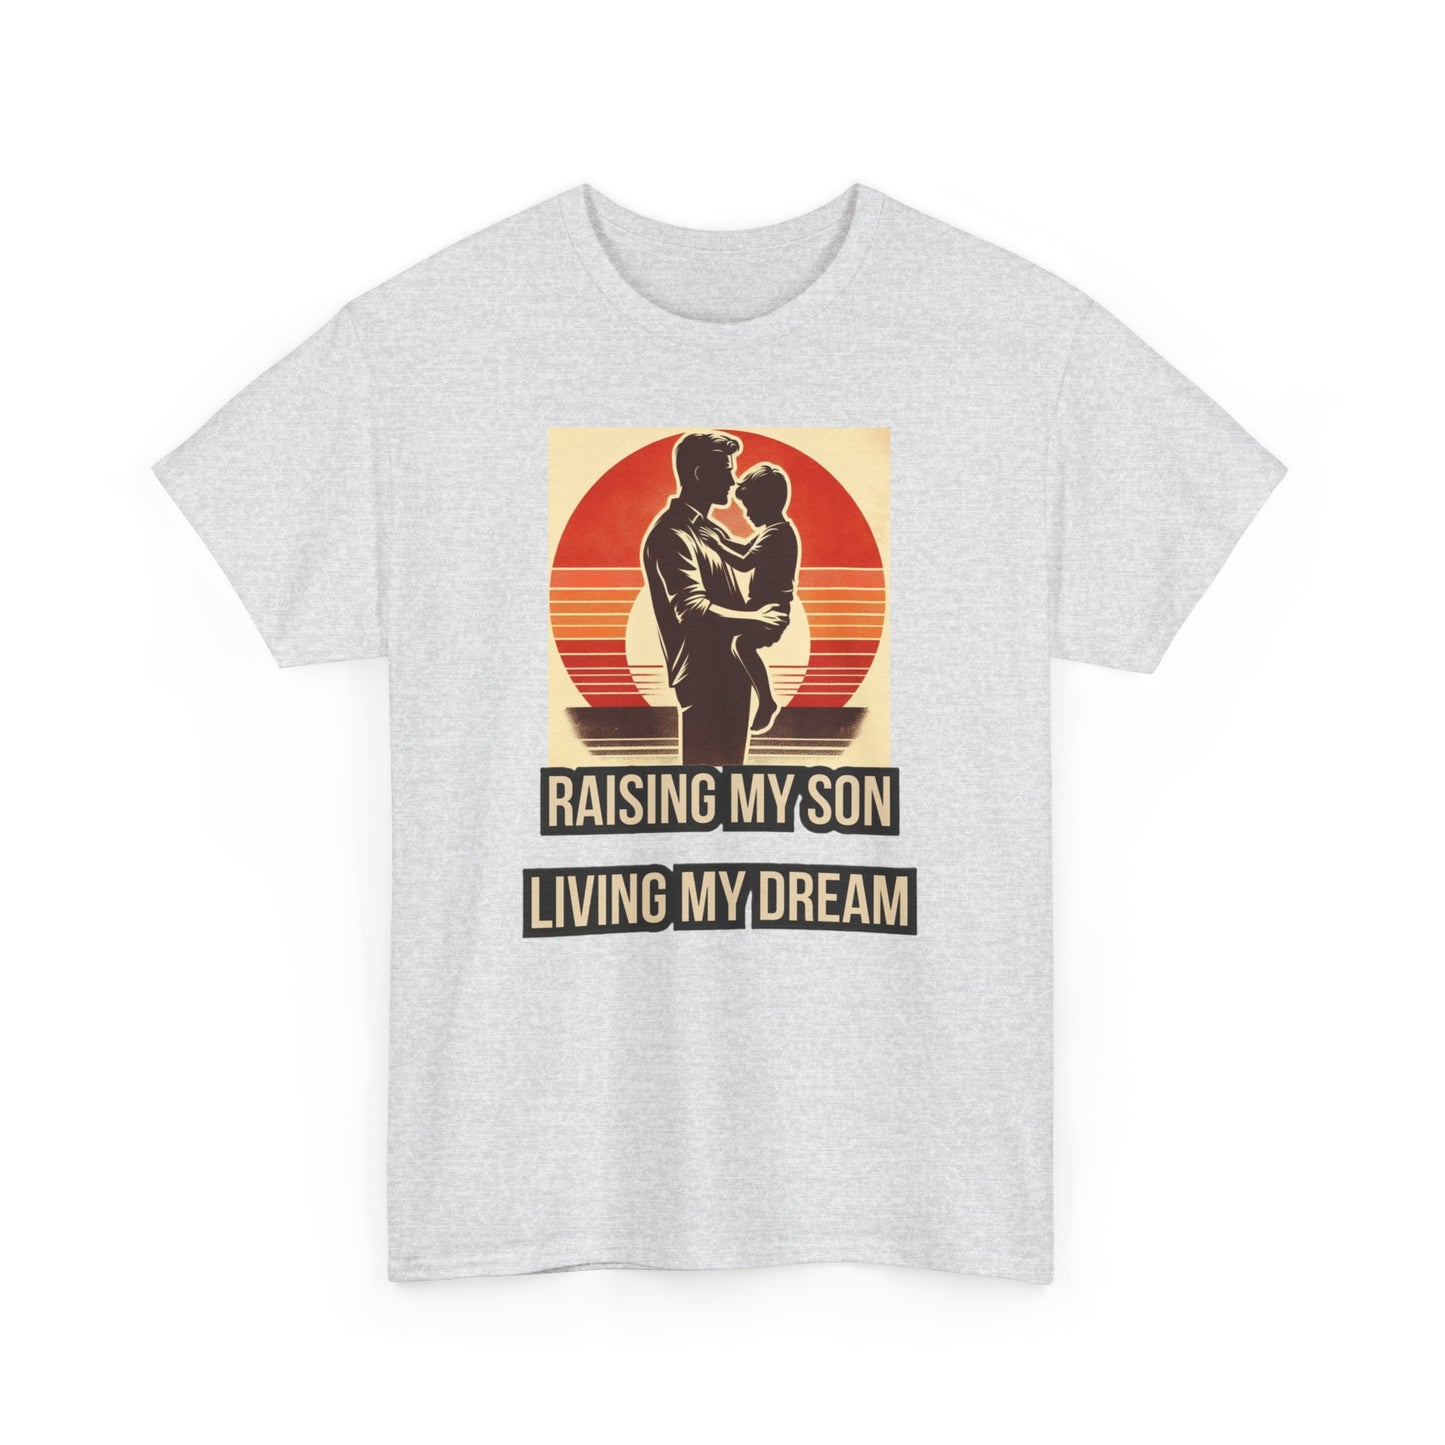 Raising My Son, Living My Dream - Unisex Heavy Cotton Tee, Gift Idea for Father's day, Birthday and Special Occasions .